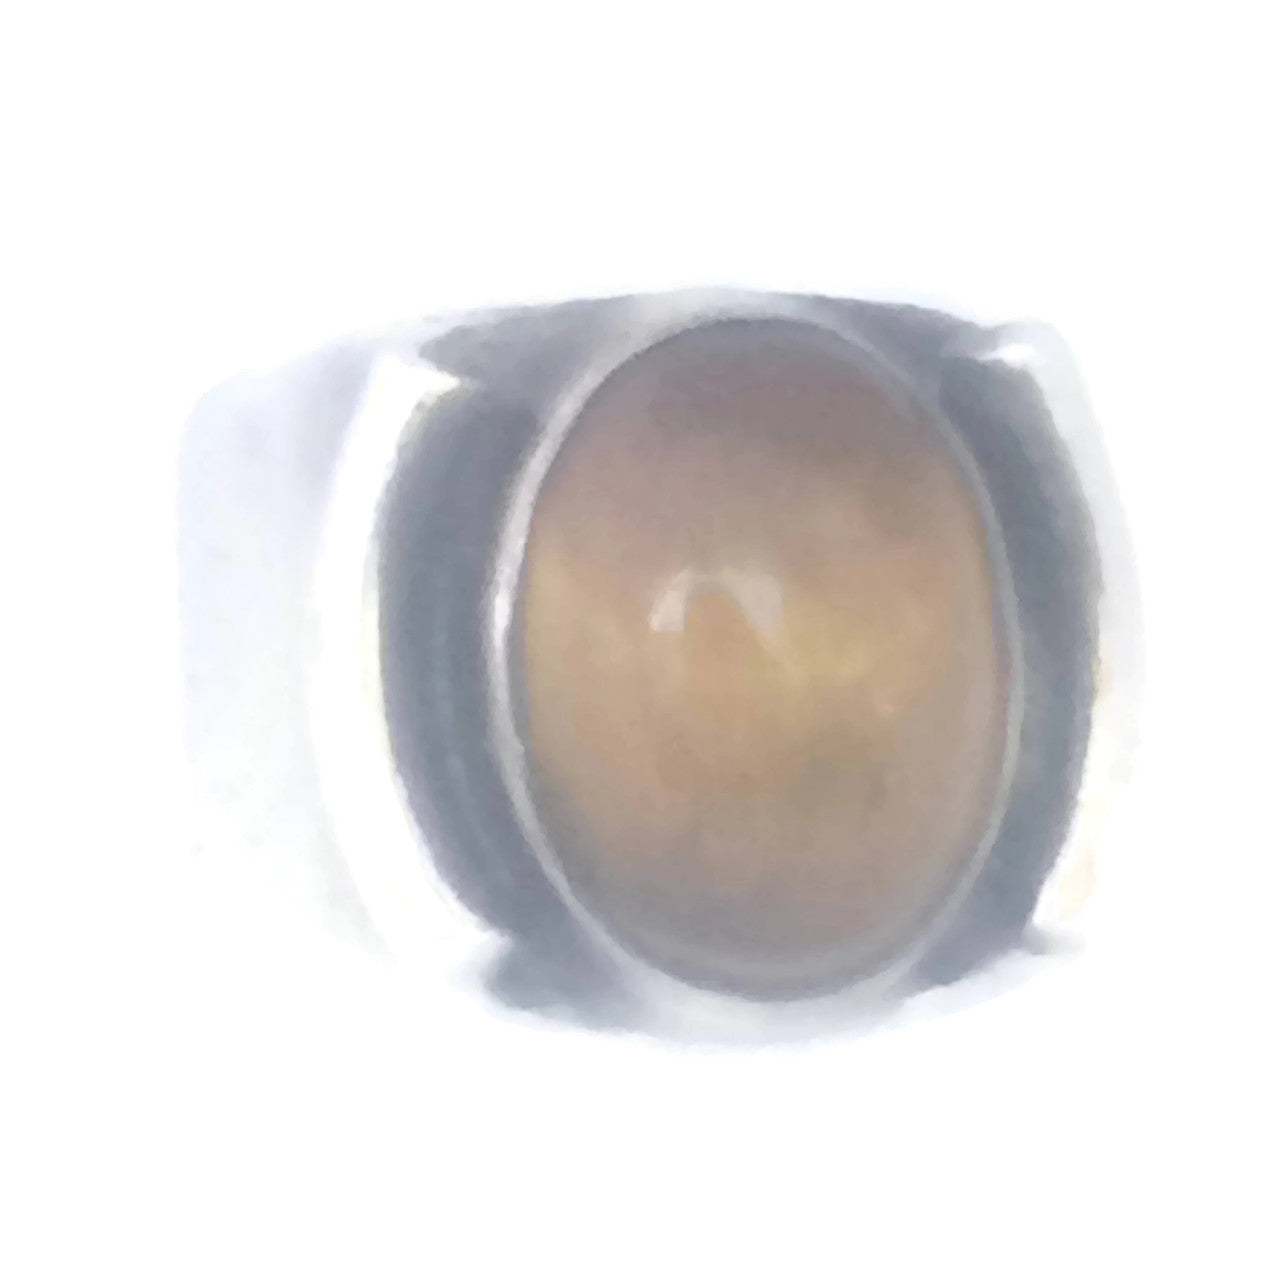 Tiger Eye Ring Southwest Sterling Silver Mexico Size 7.75